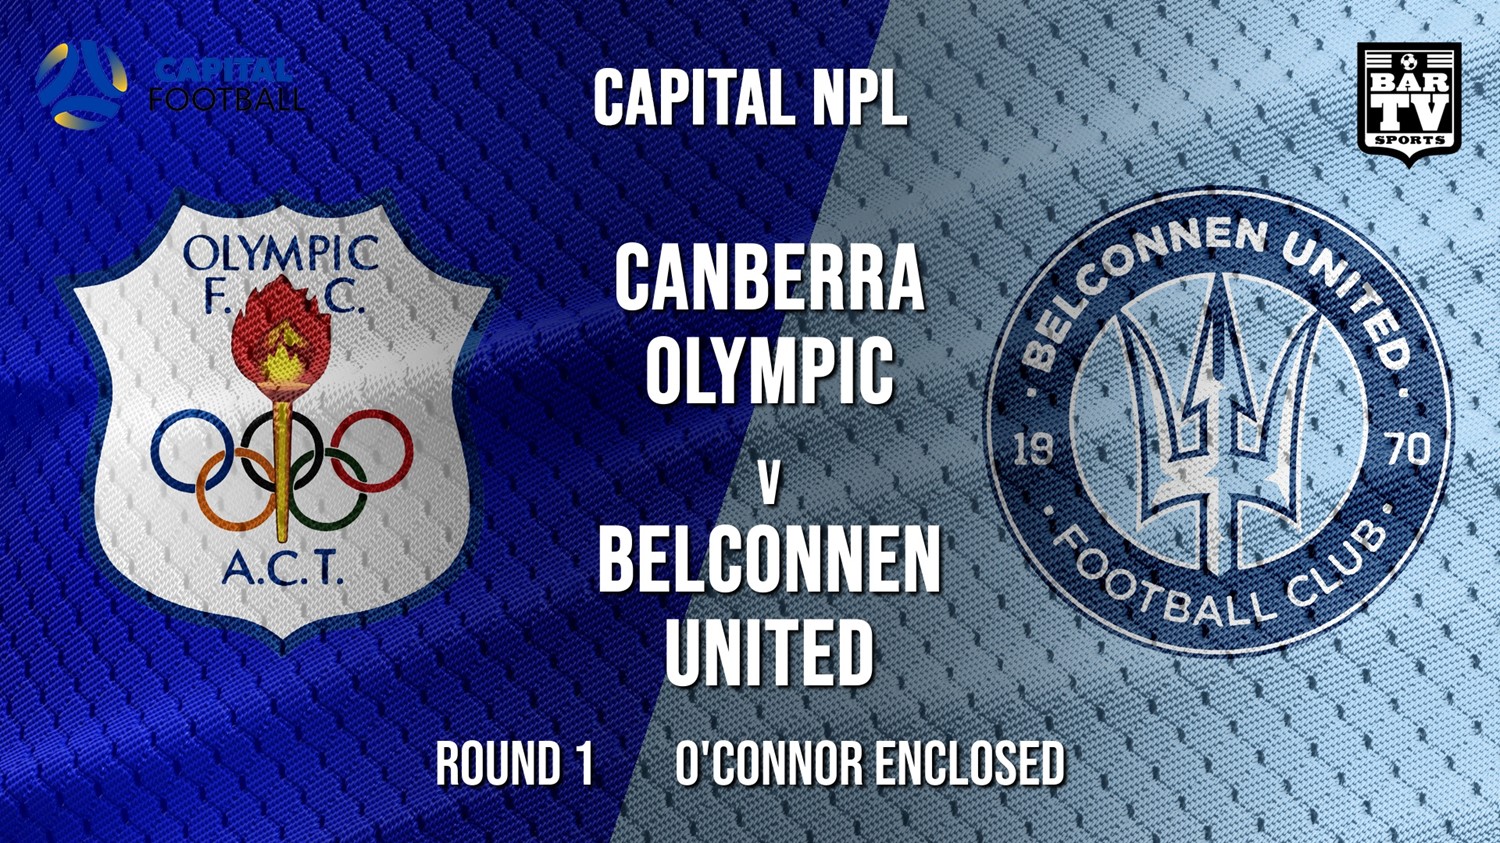 NPL - Capital Round 1 - Canberra Olympic FC v Belconnen United FC (1) Minigame Slate Image